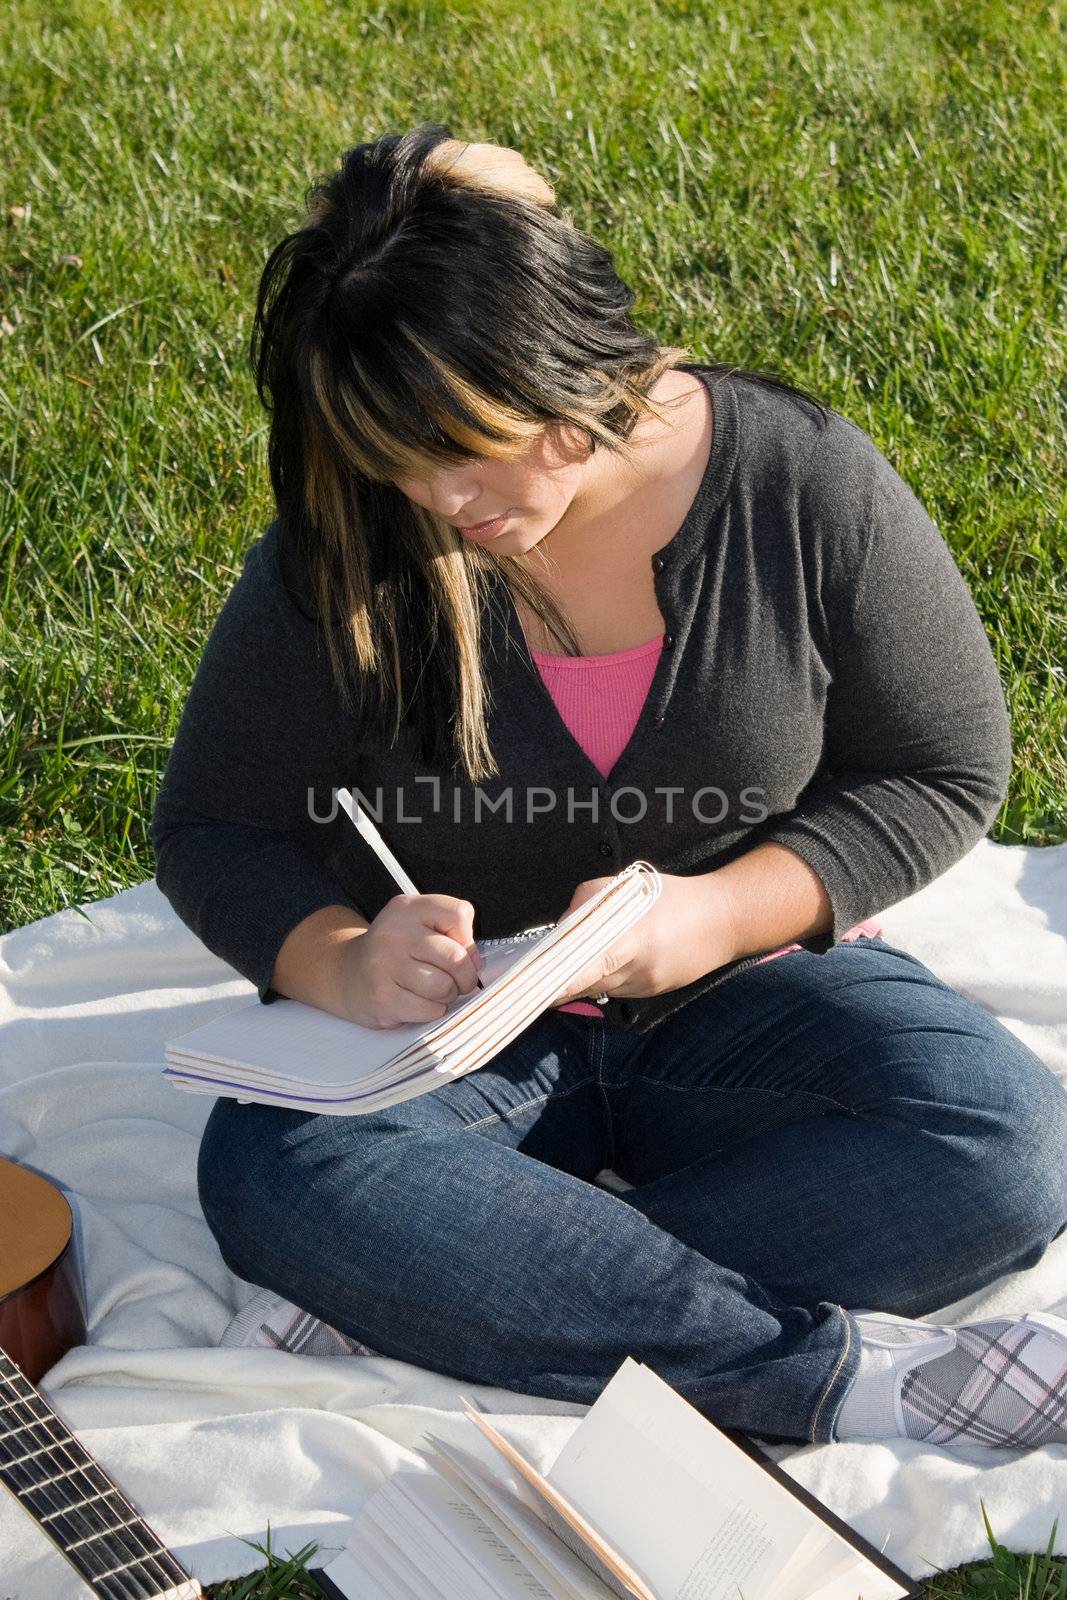 A young musician writing in her notebook while sitting in the grass on a nice day.